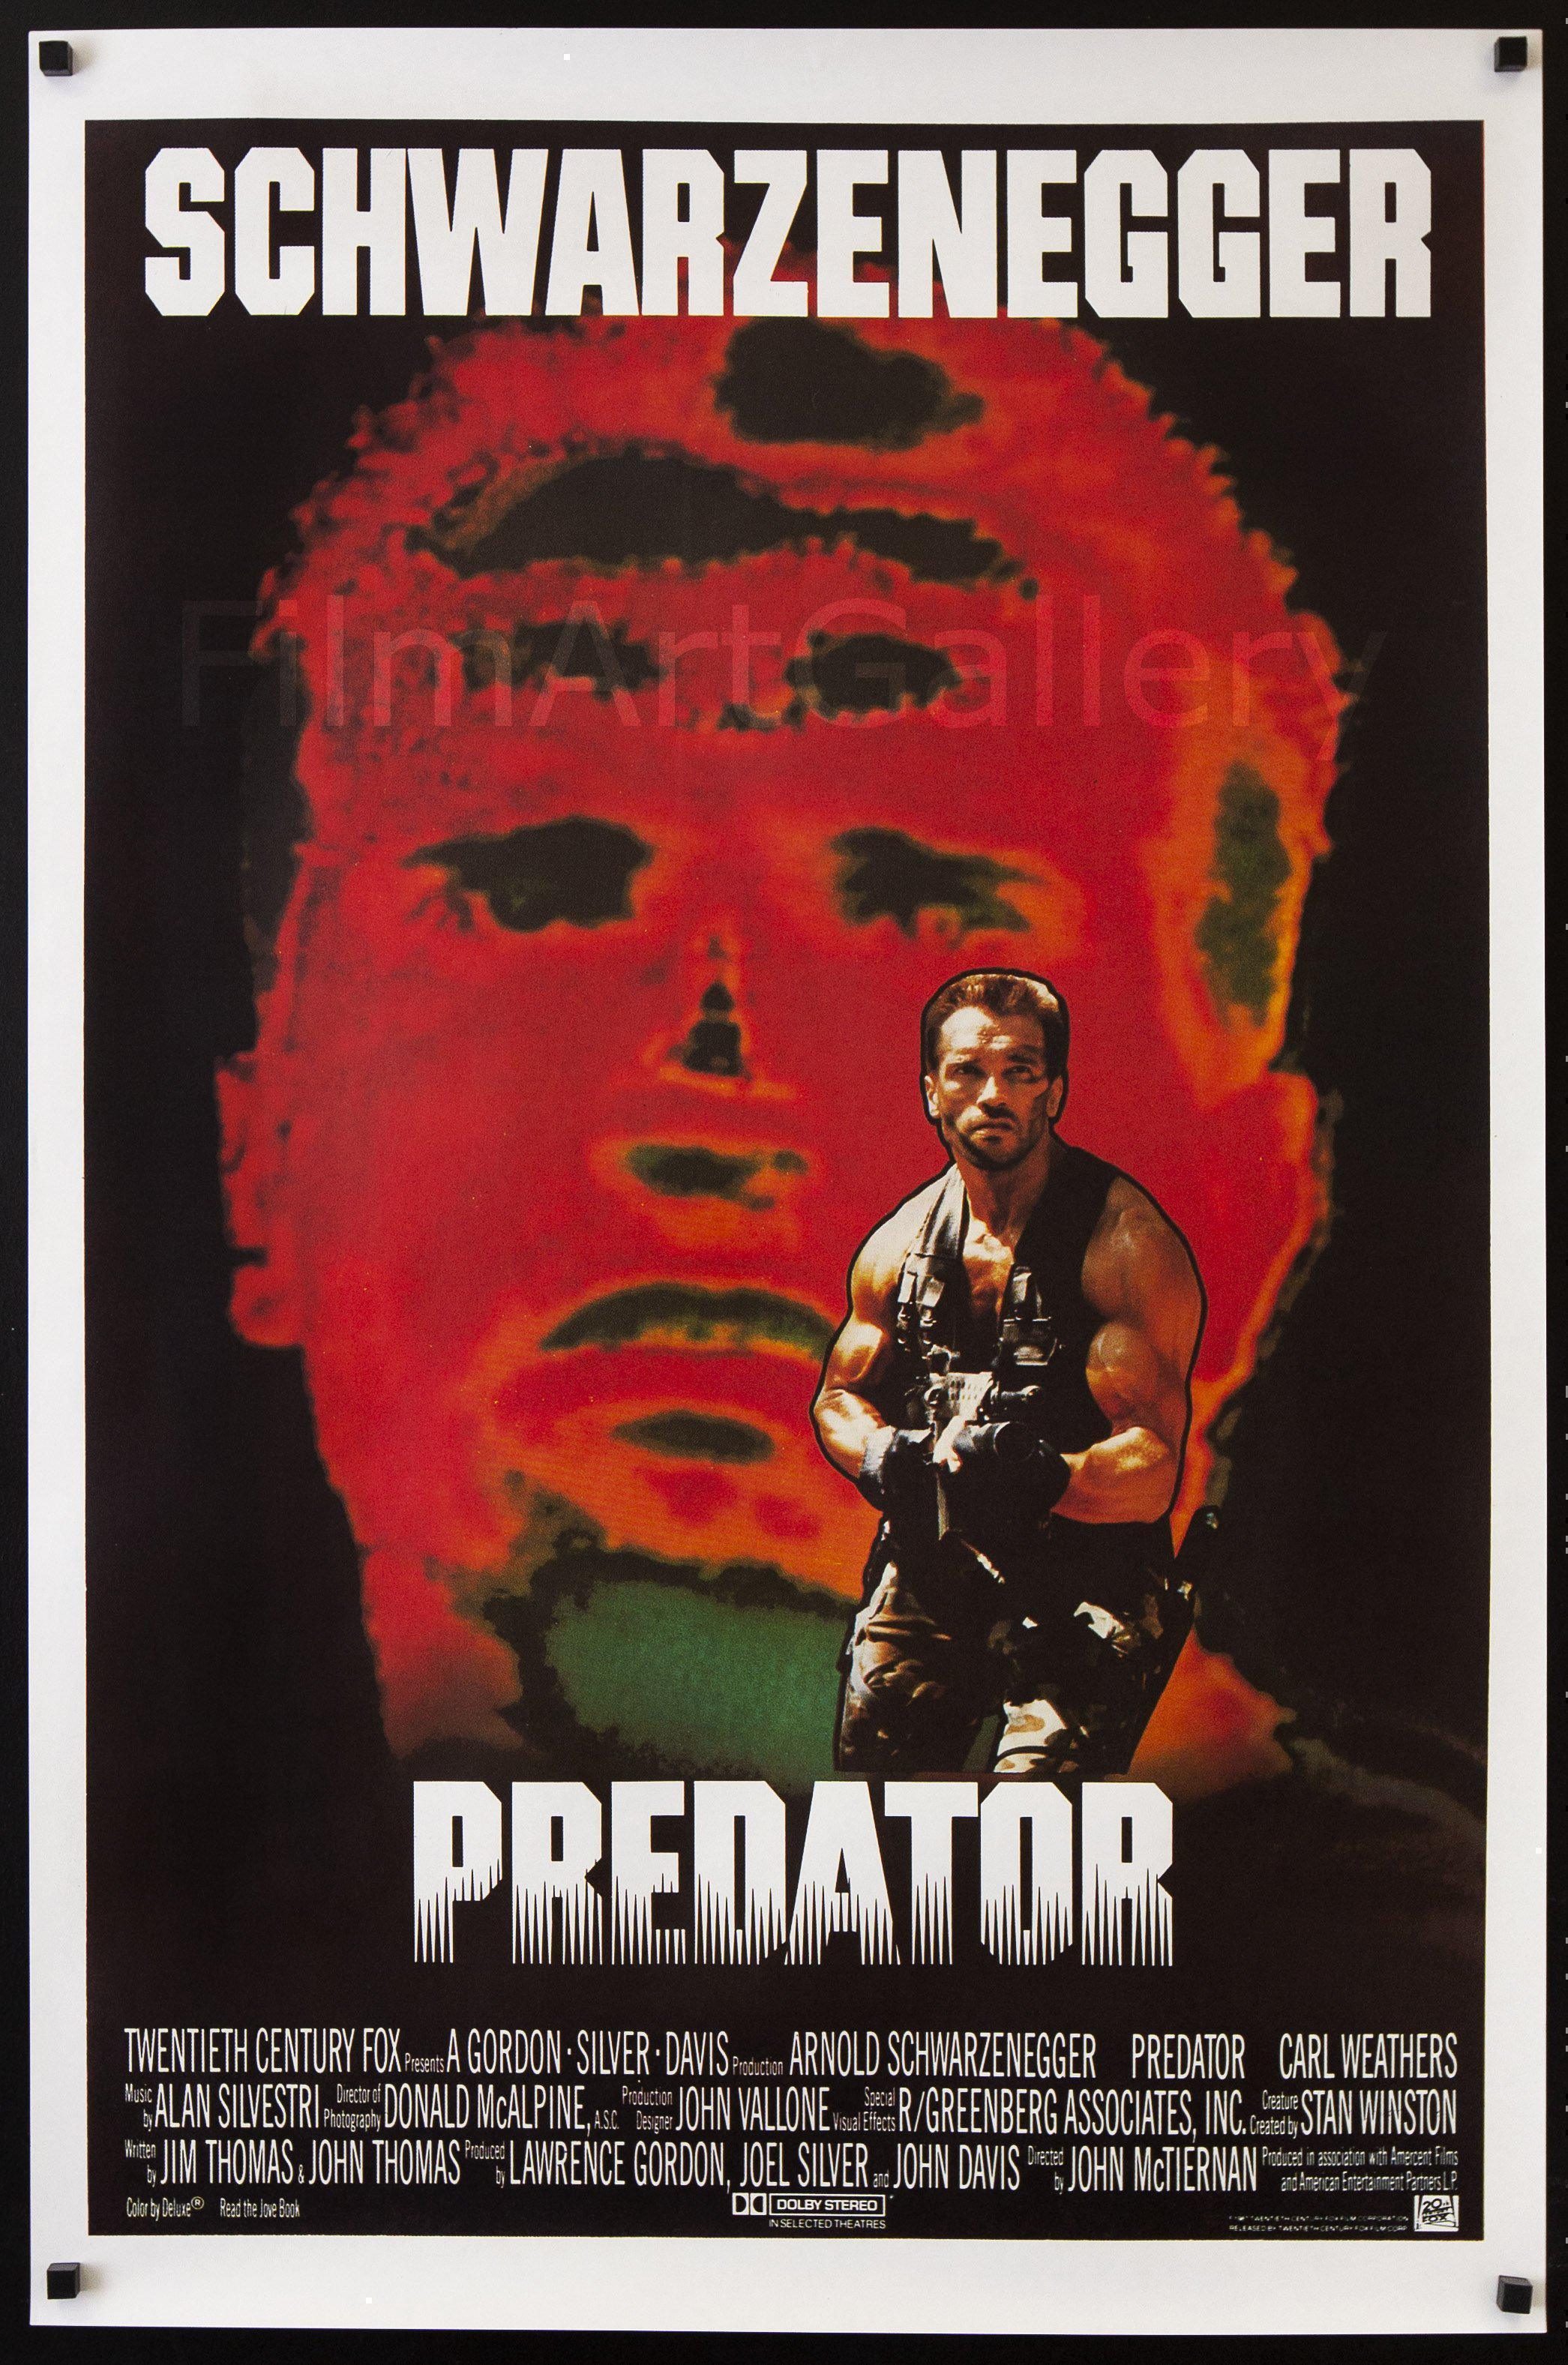 The Poster Project — Live now! My new Predator vintage-style movie